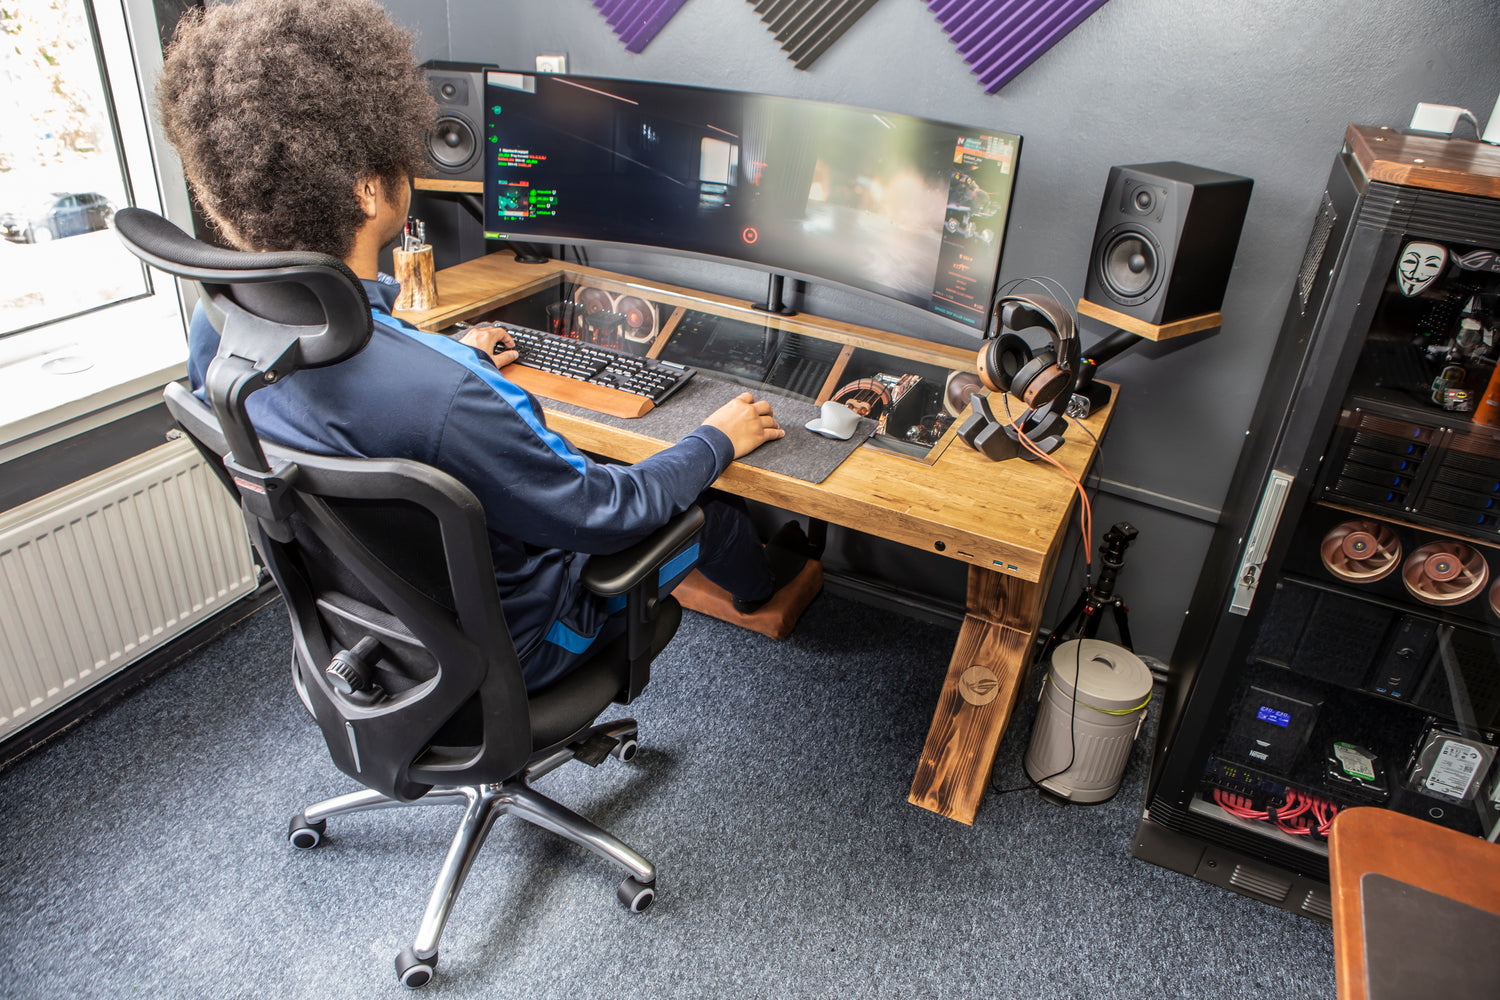 Is Gaming Chair Ergonomic? | The Ultimate Gamer's Guide